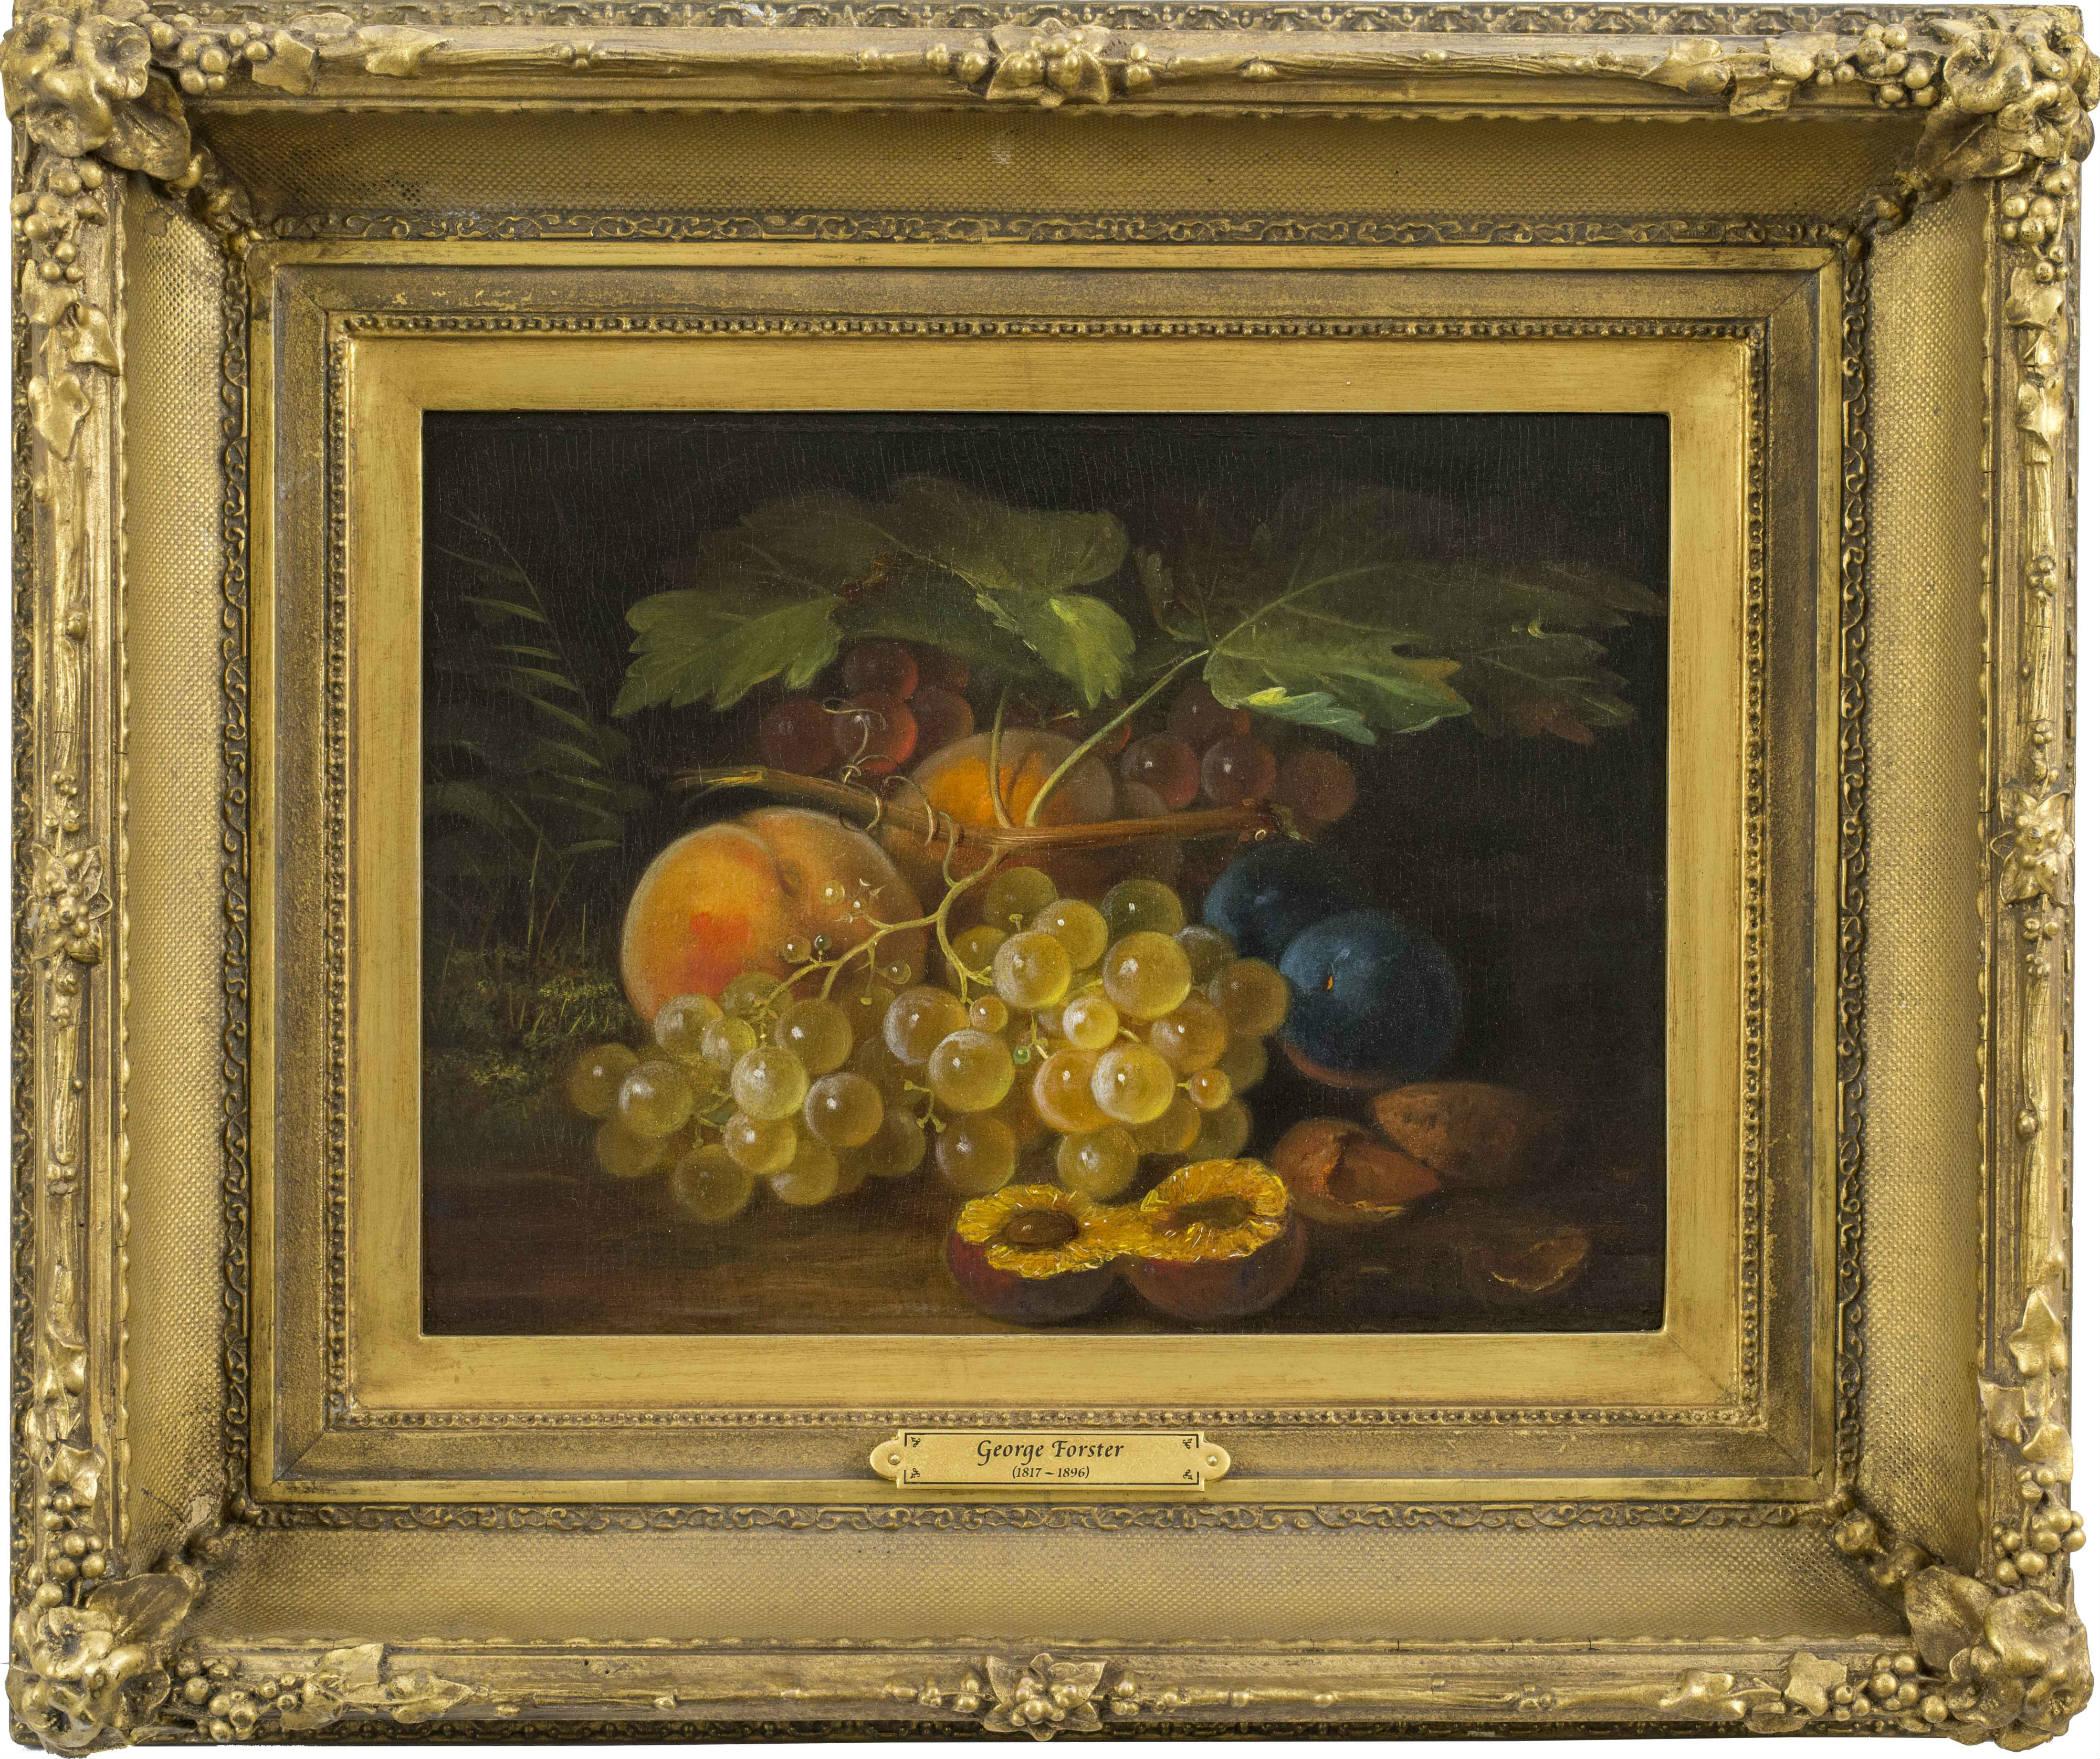 Still Life with Fruit by George Forster (1817-1896, German-American)

GEORGE FORSTER (1817-1896)
Still Life with Fruit
Oil on panel 
8 x 10 7/8 inches 
Unsigned

The lifelike manner in which George Forster paints still-lifes recalls the style of